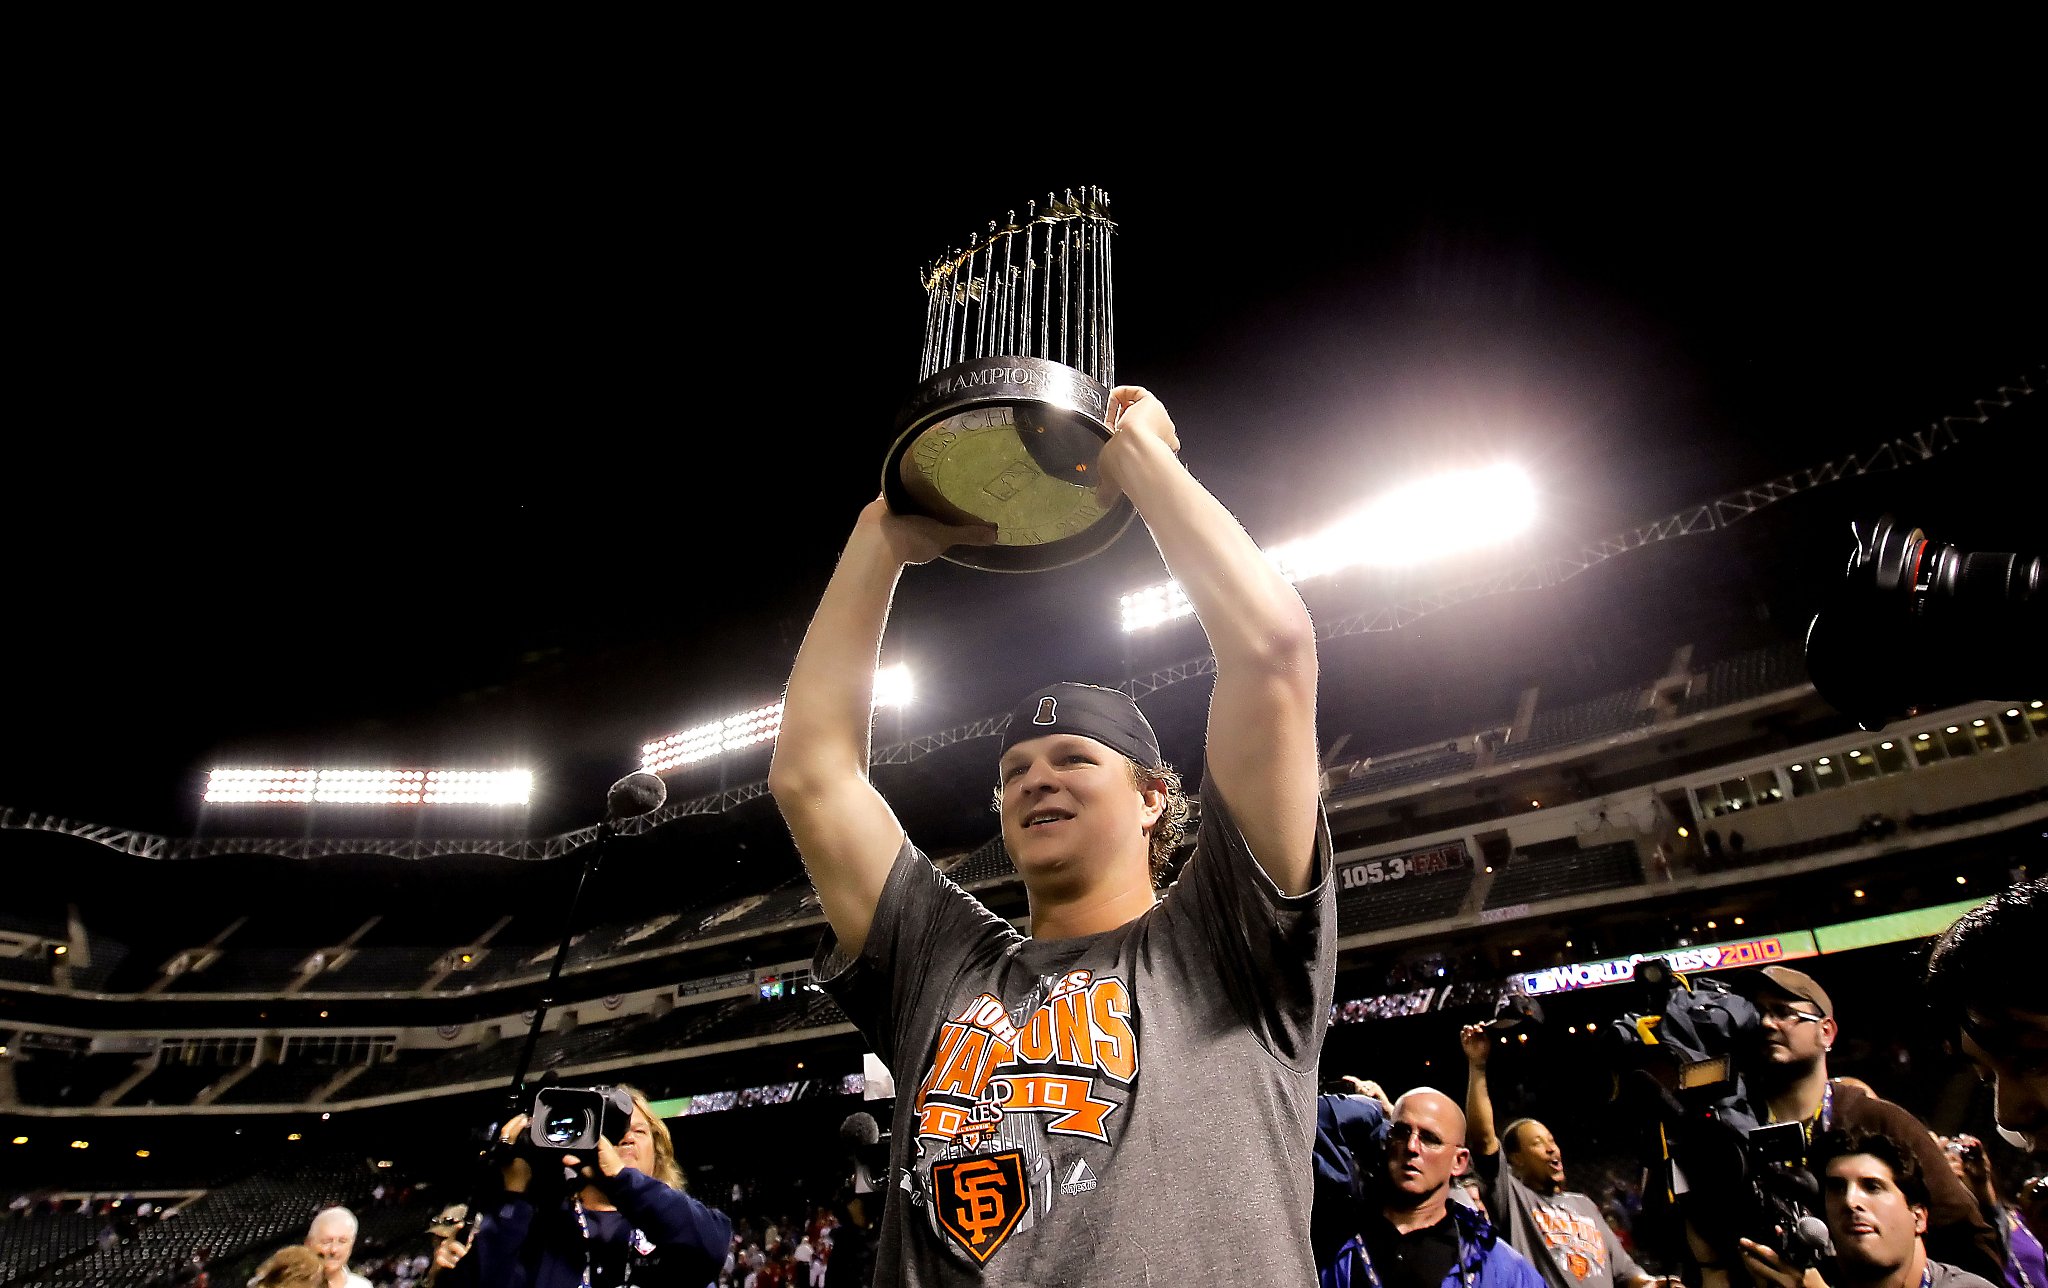 Champs! A photo deep dive of Giants' 2010 World Series win